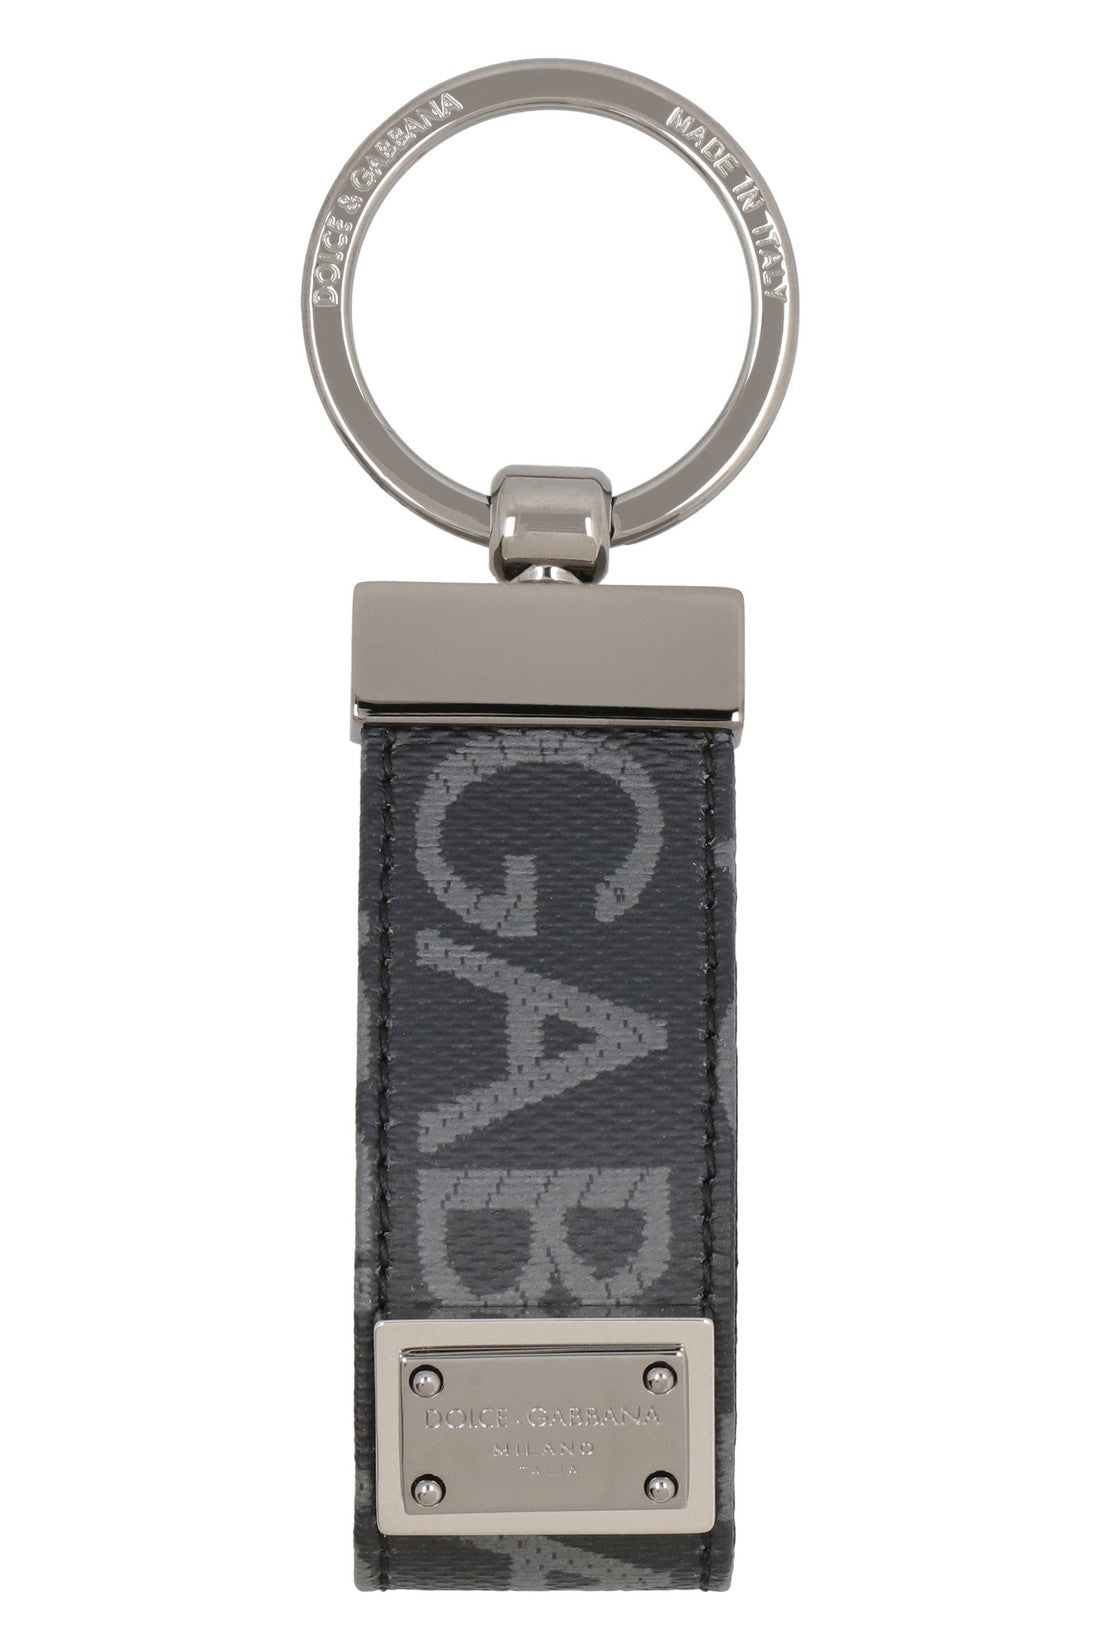 Dolce & Gabbana-OUTLET-SALE-Fabric key ring with logo-ARCHIVIST